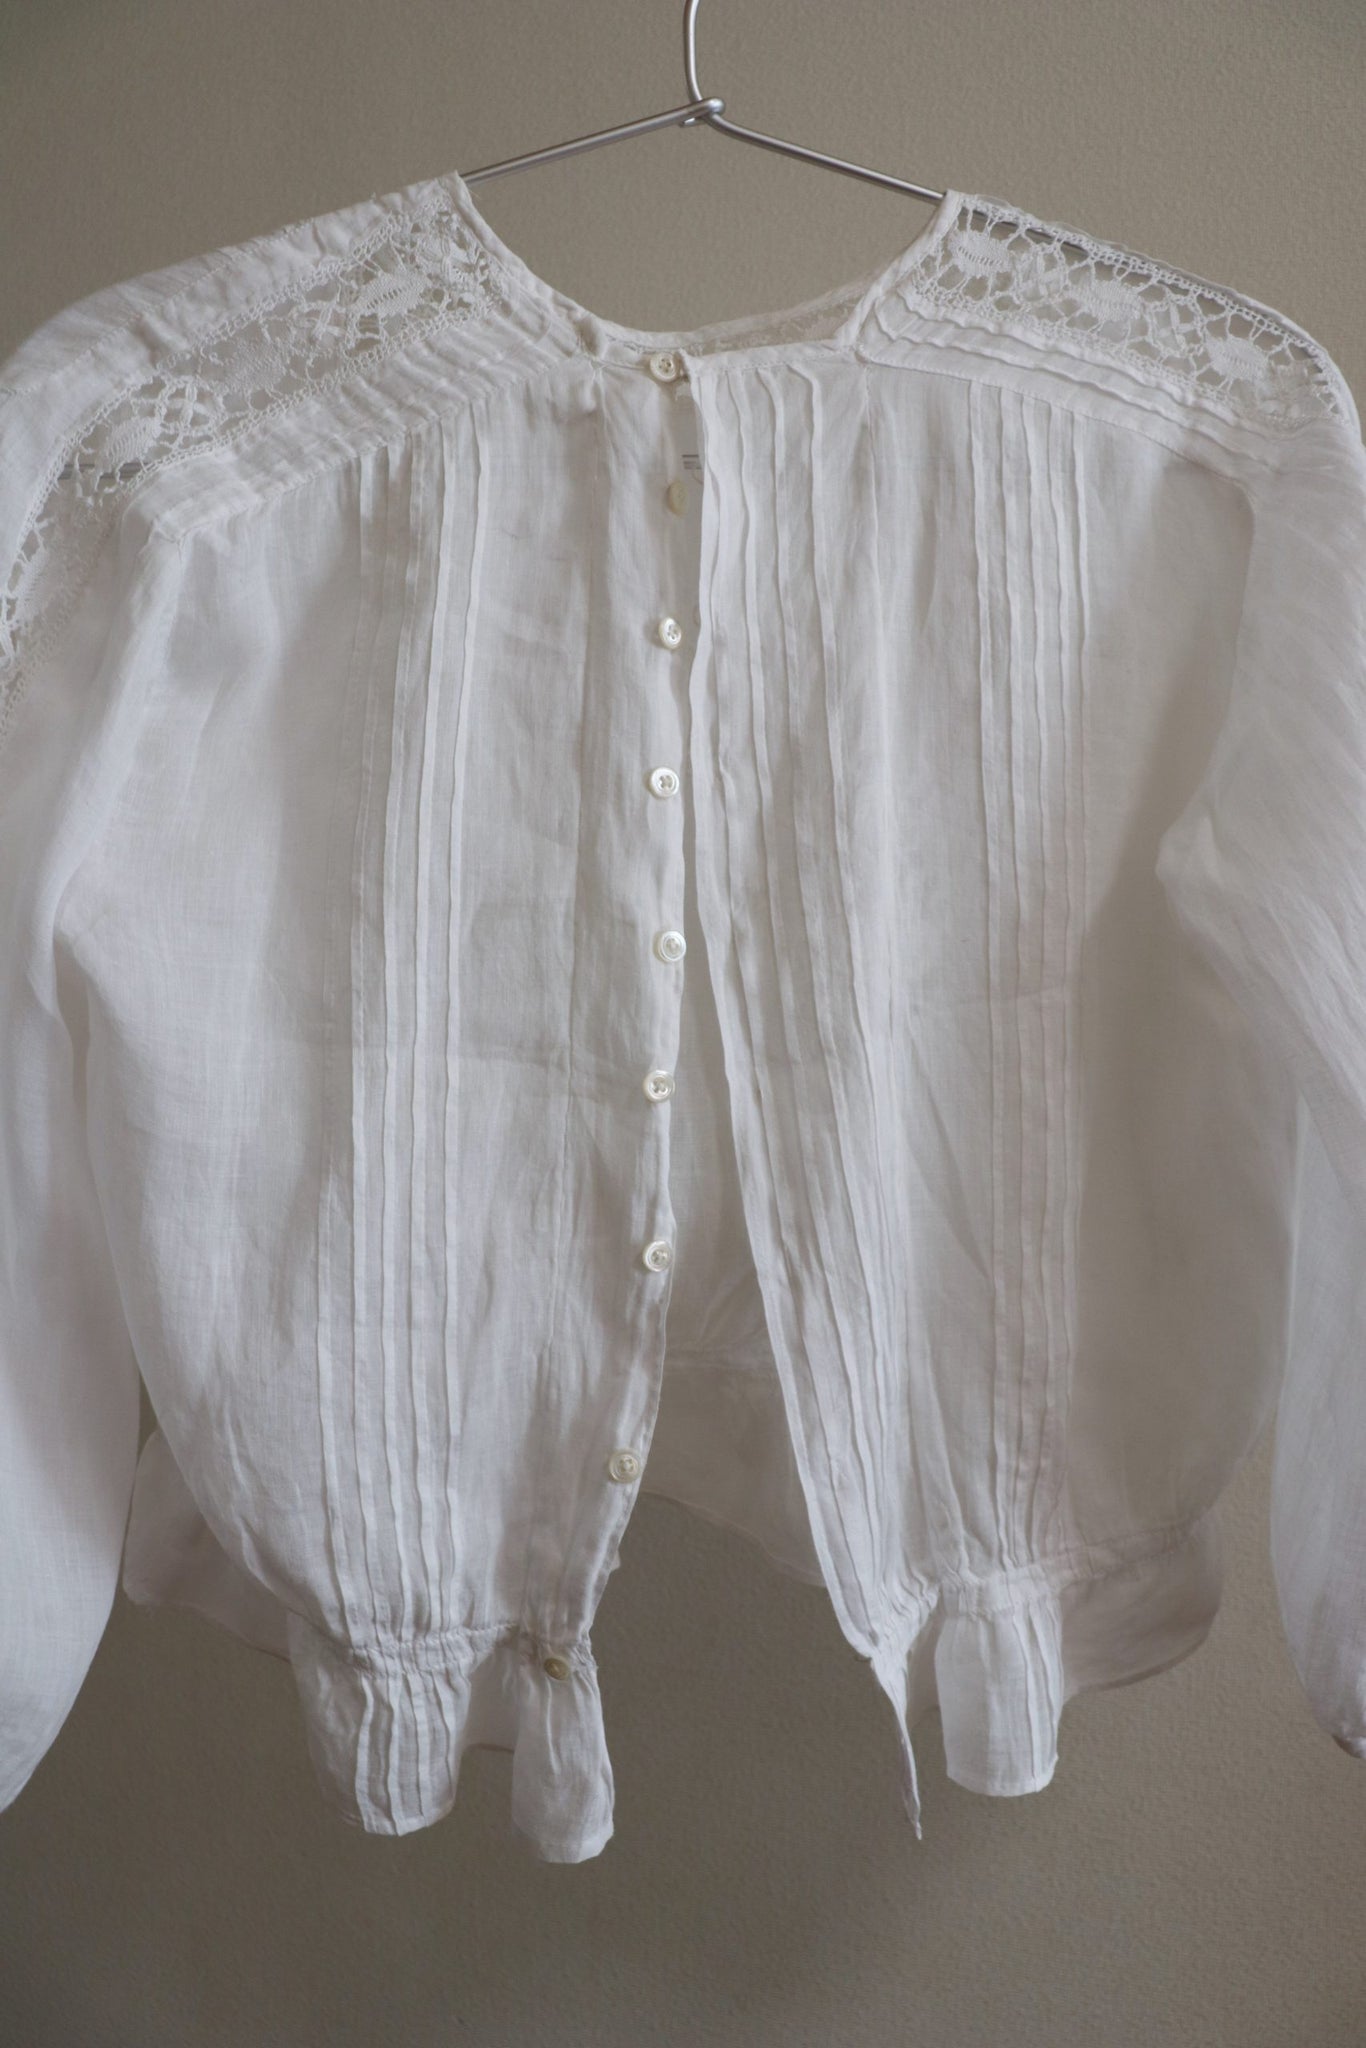 1910s Antique Embroidered Cotton Blouse